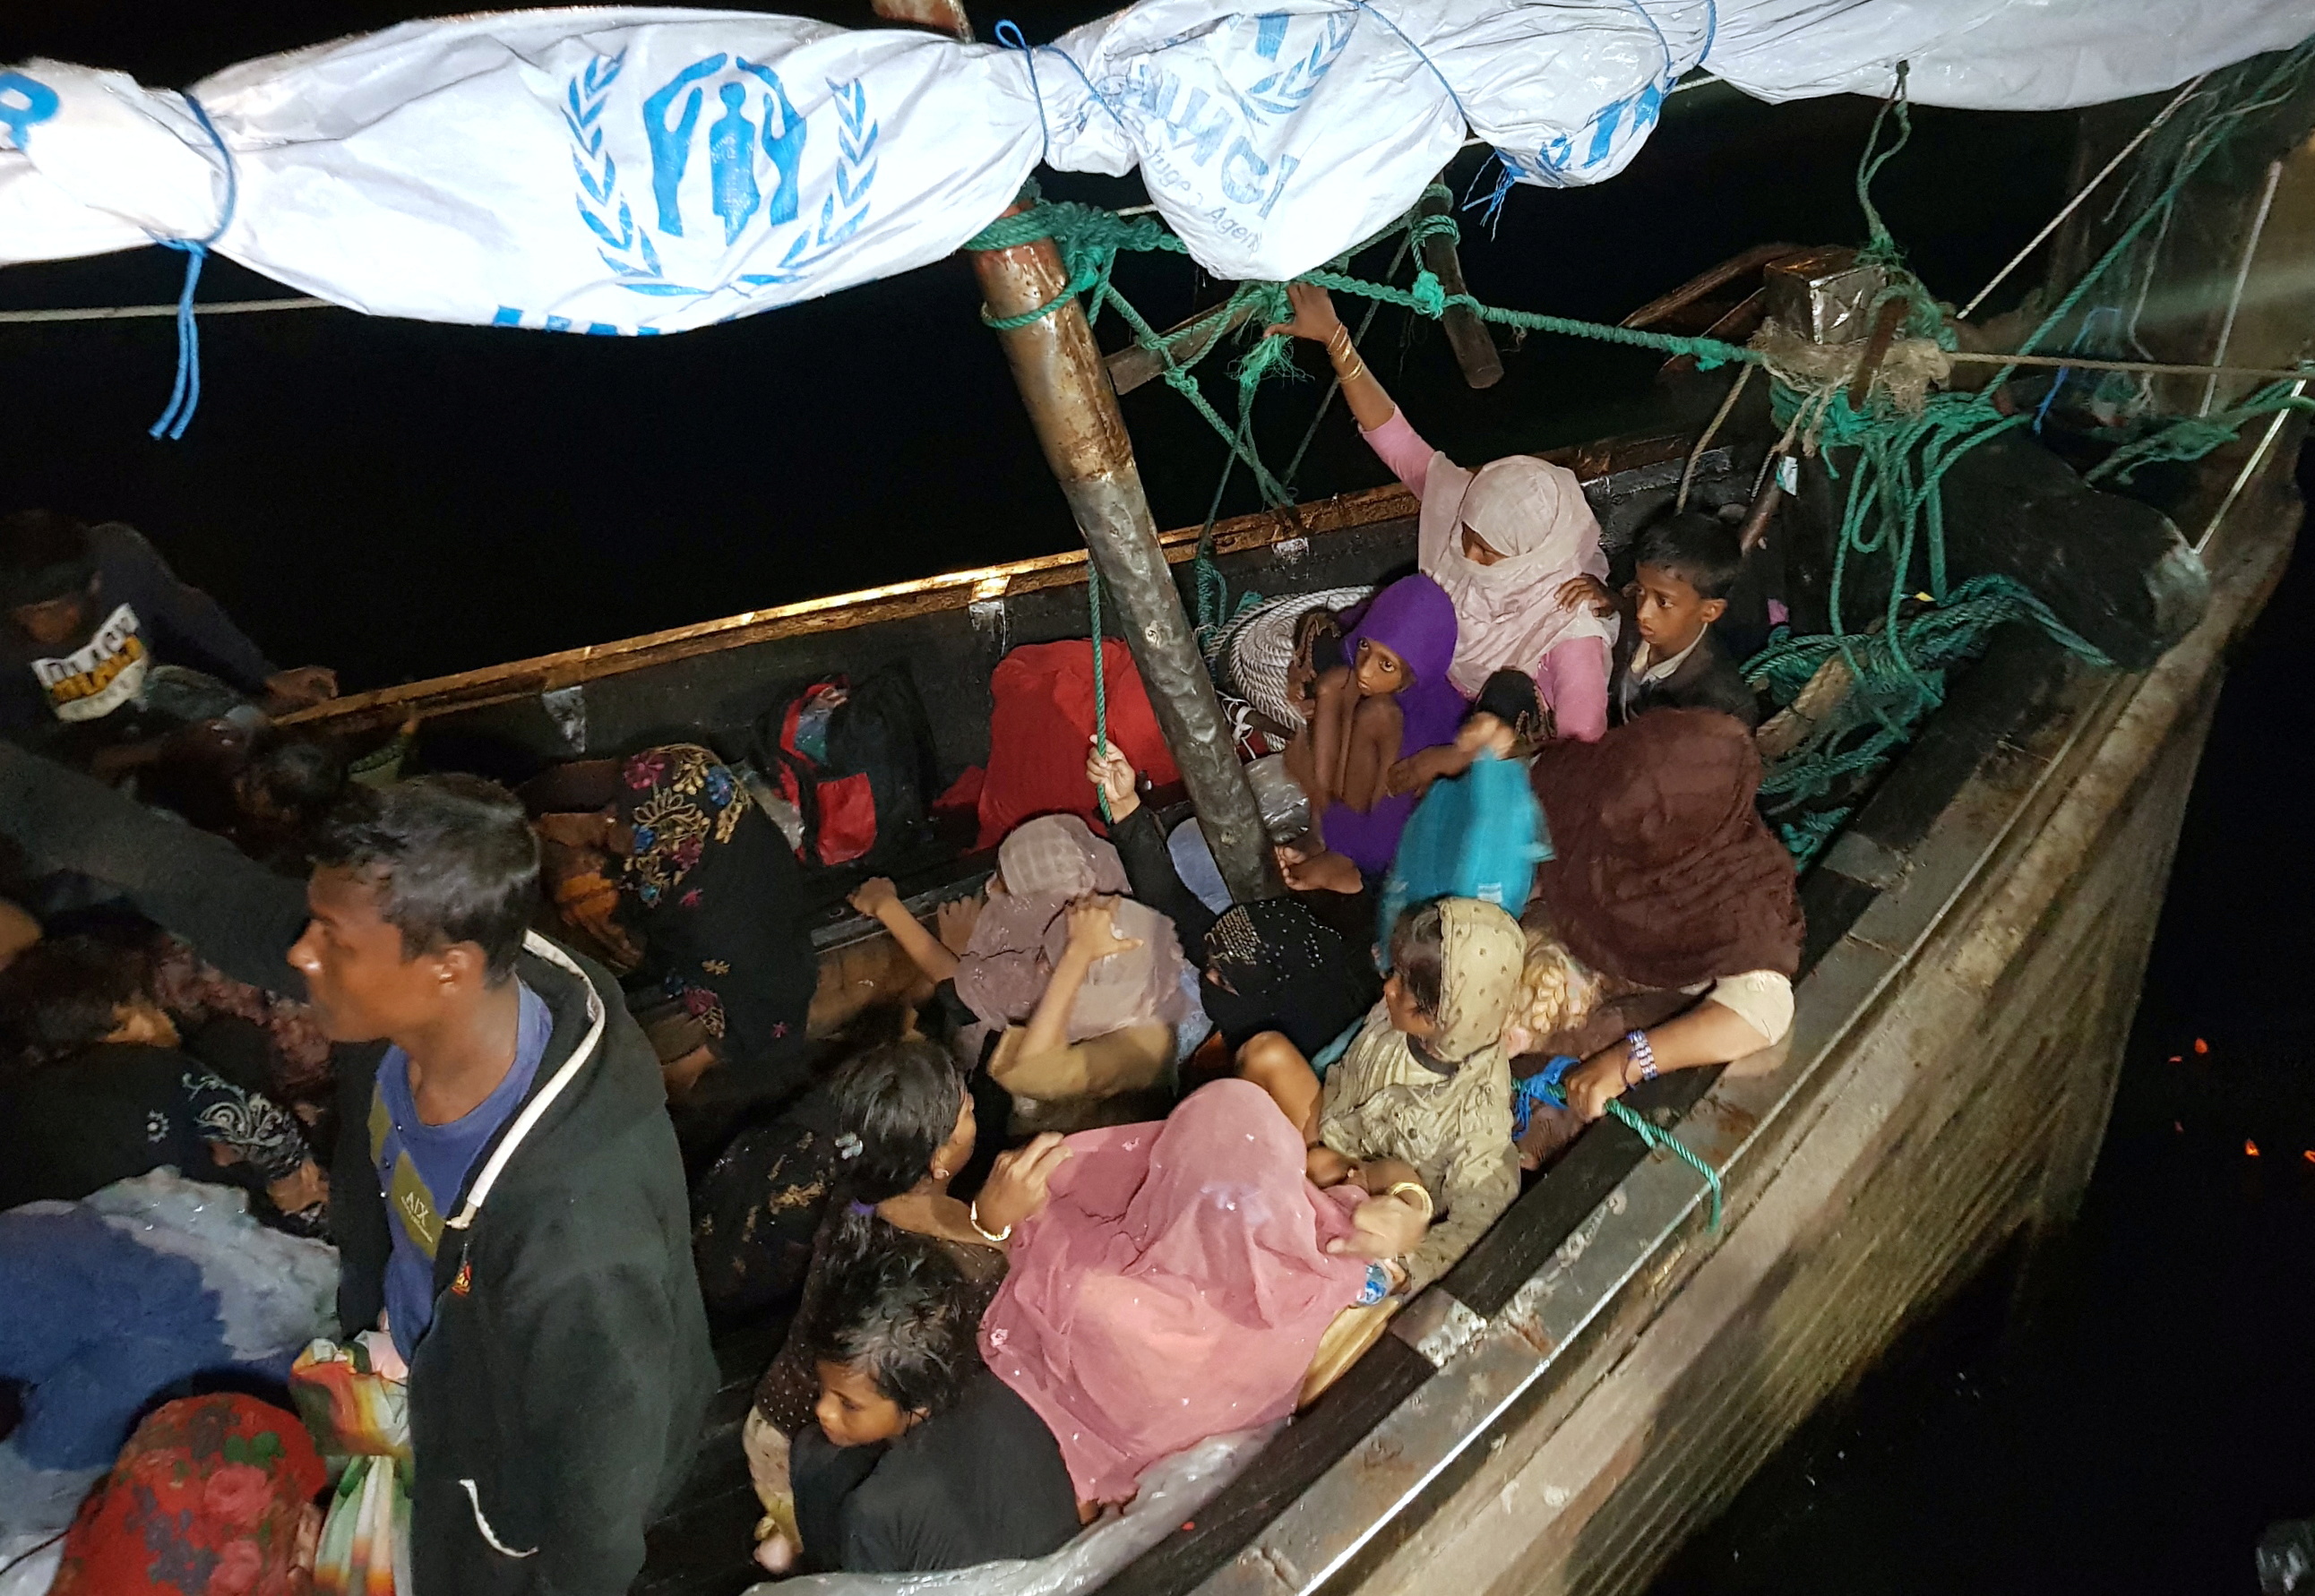 Rohingya refugees arrive by boat at a port in Lhokseumawe, Aceh